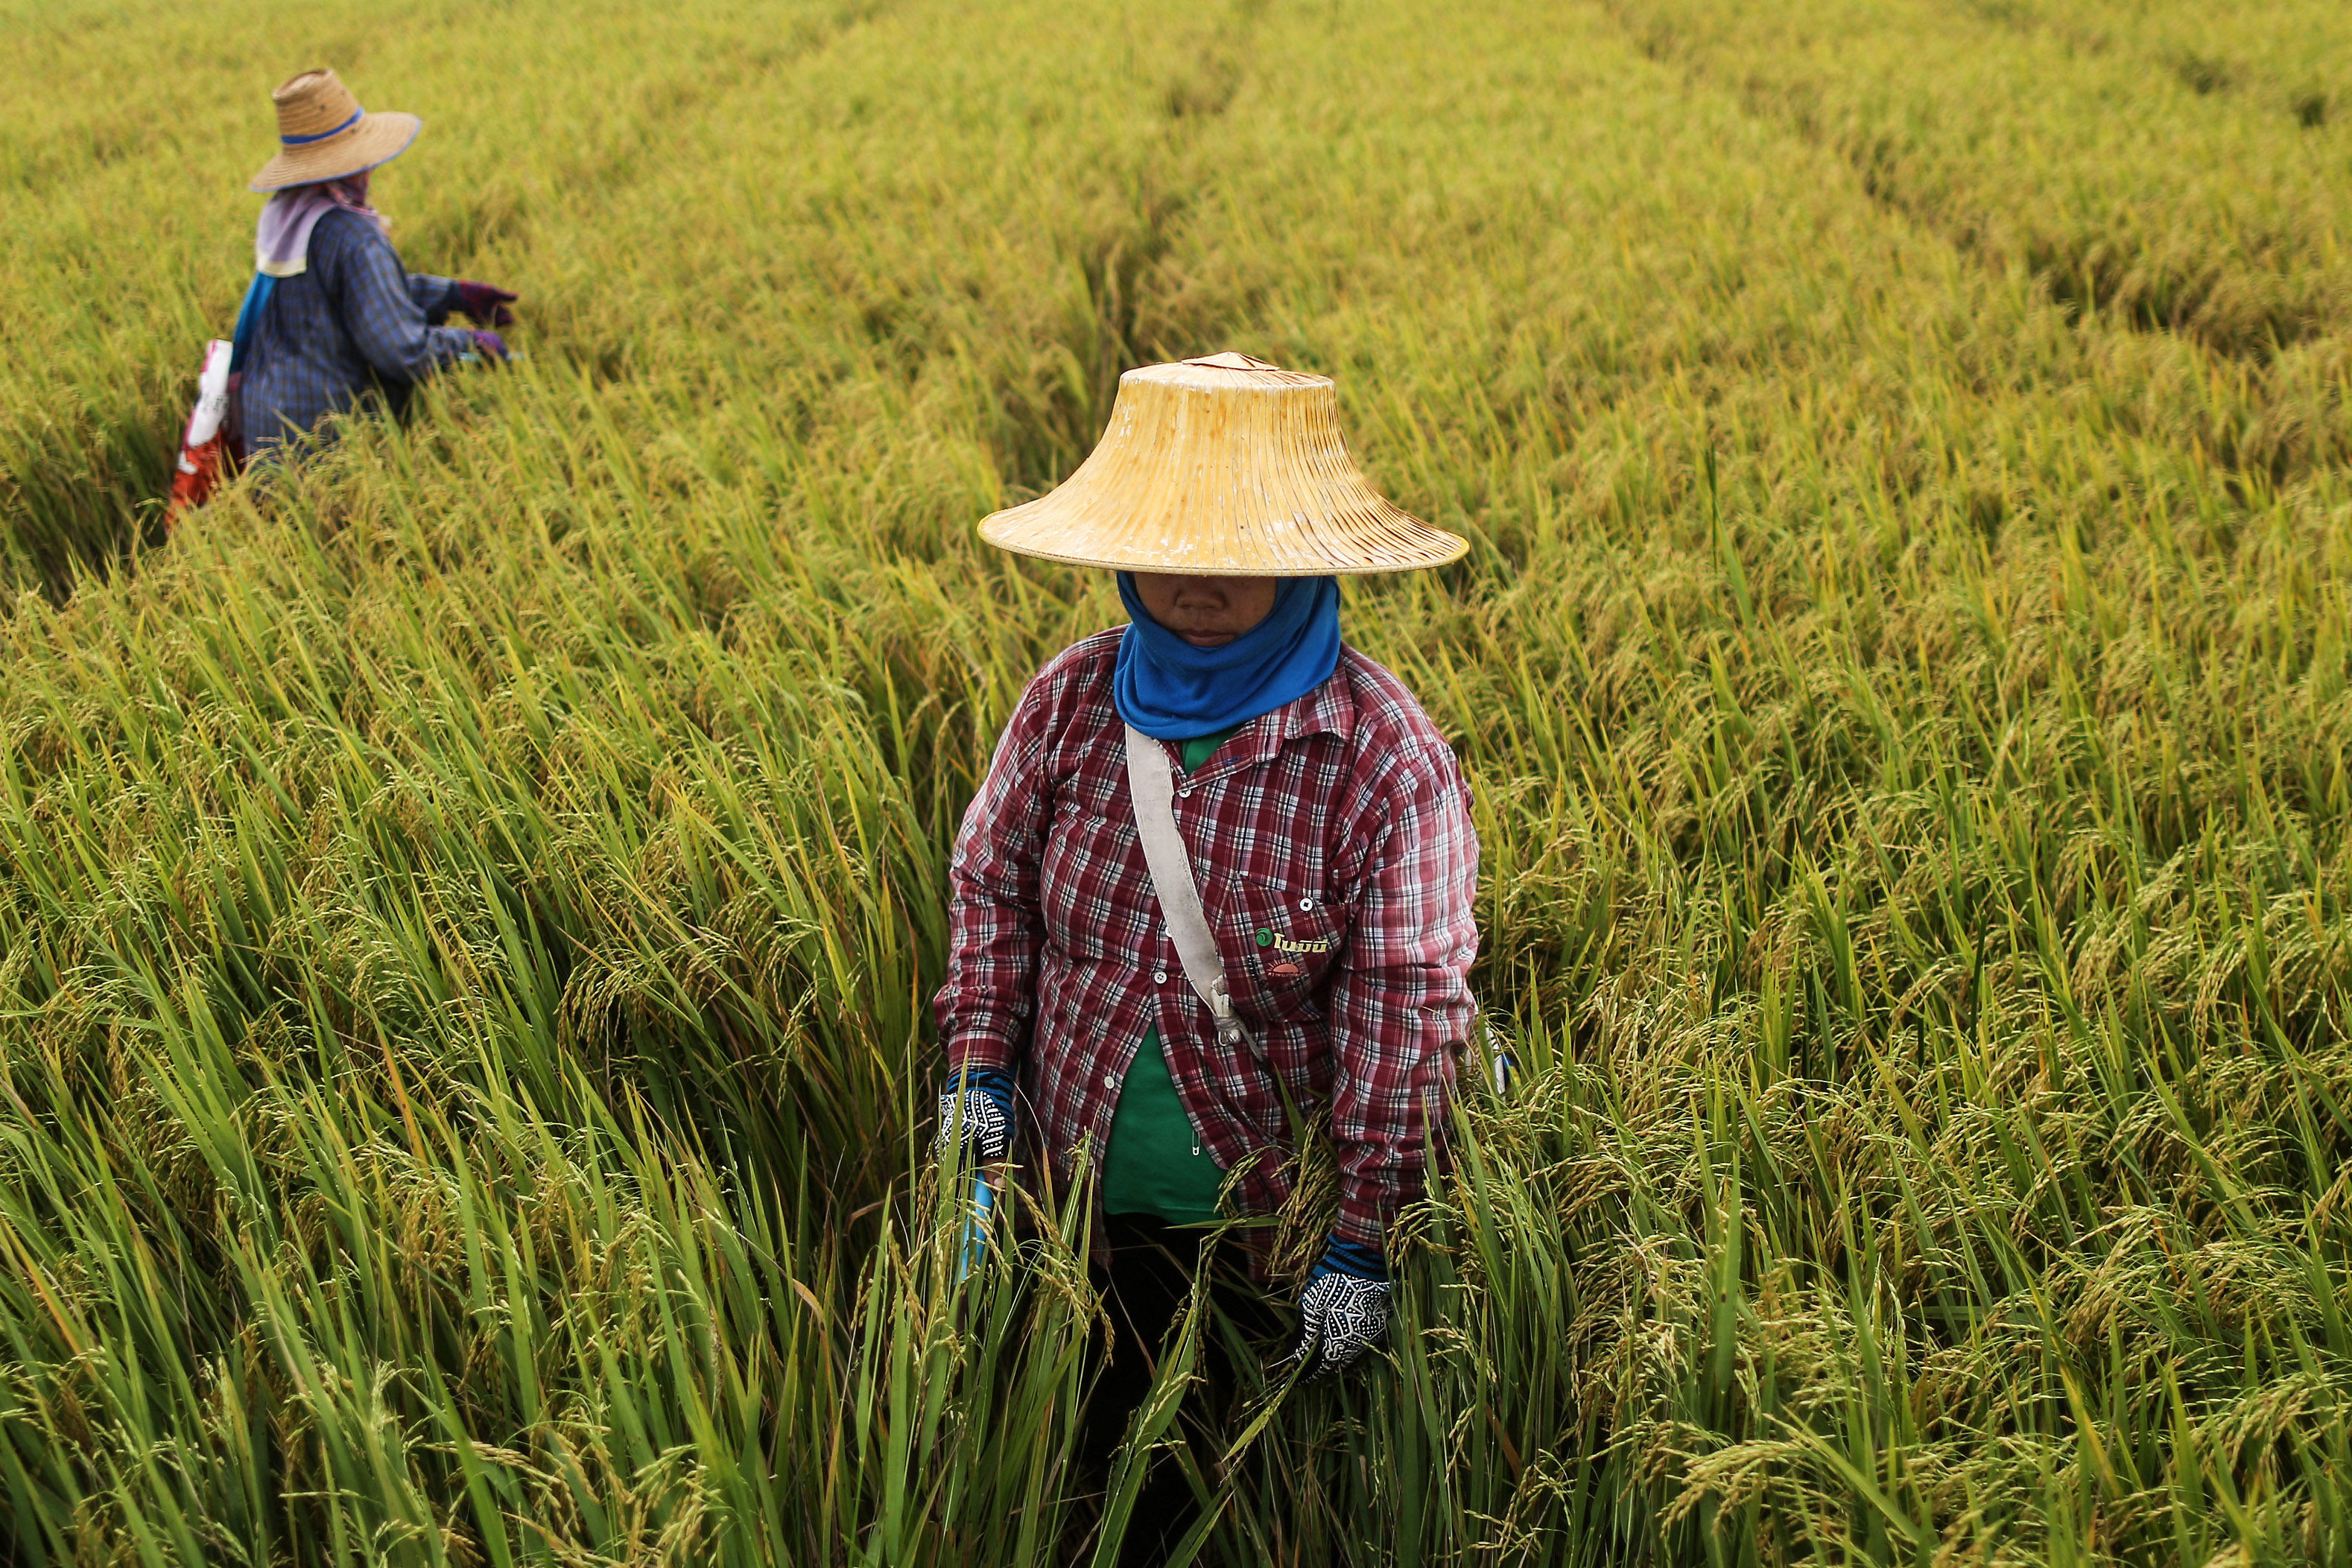 Farmers prepare rice prior to harvesting in a paddy field in Bang Sai, Ayutthaya province, Thailand.
